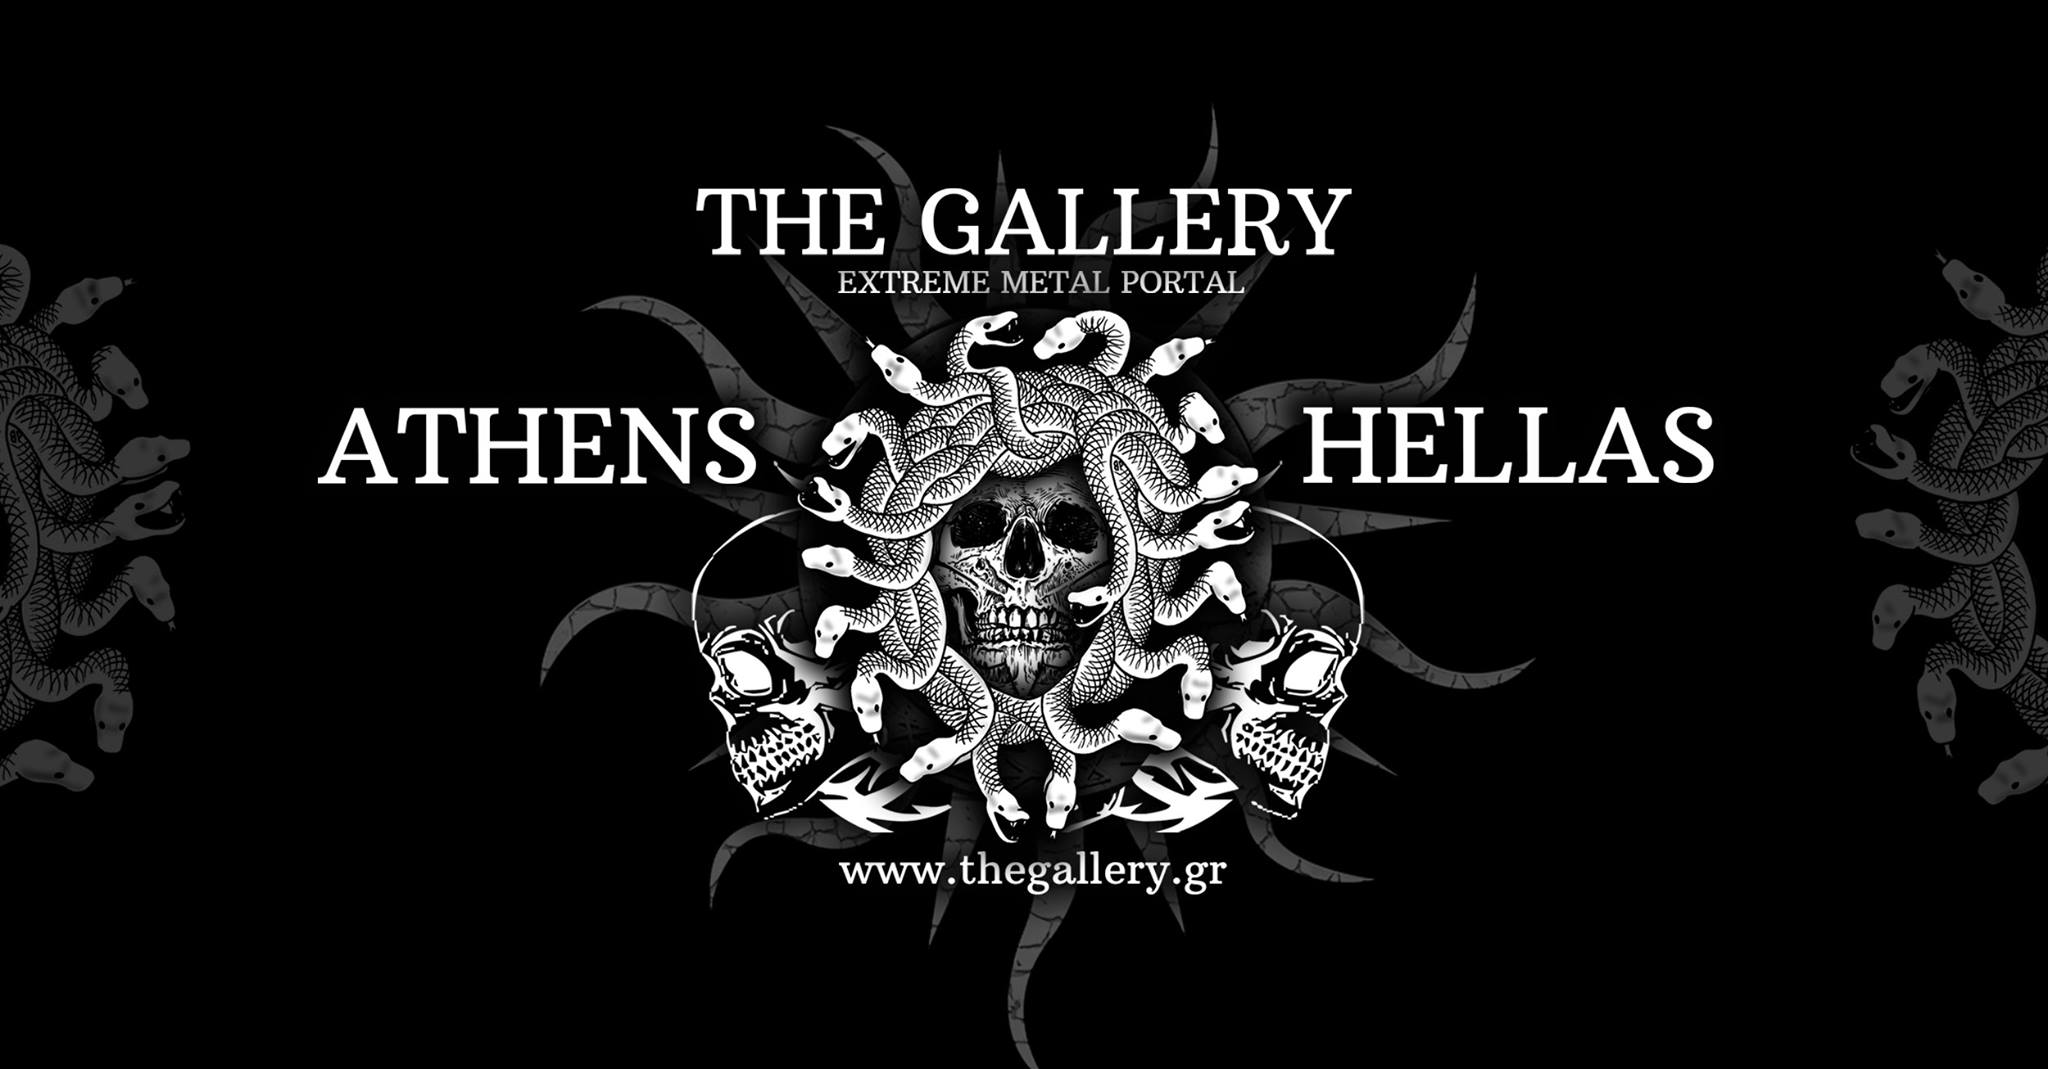 You are currently viewing THE GALLERY: EXTREME METAL PORTAL – Το τέλος του γκρουπ;;;